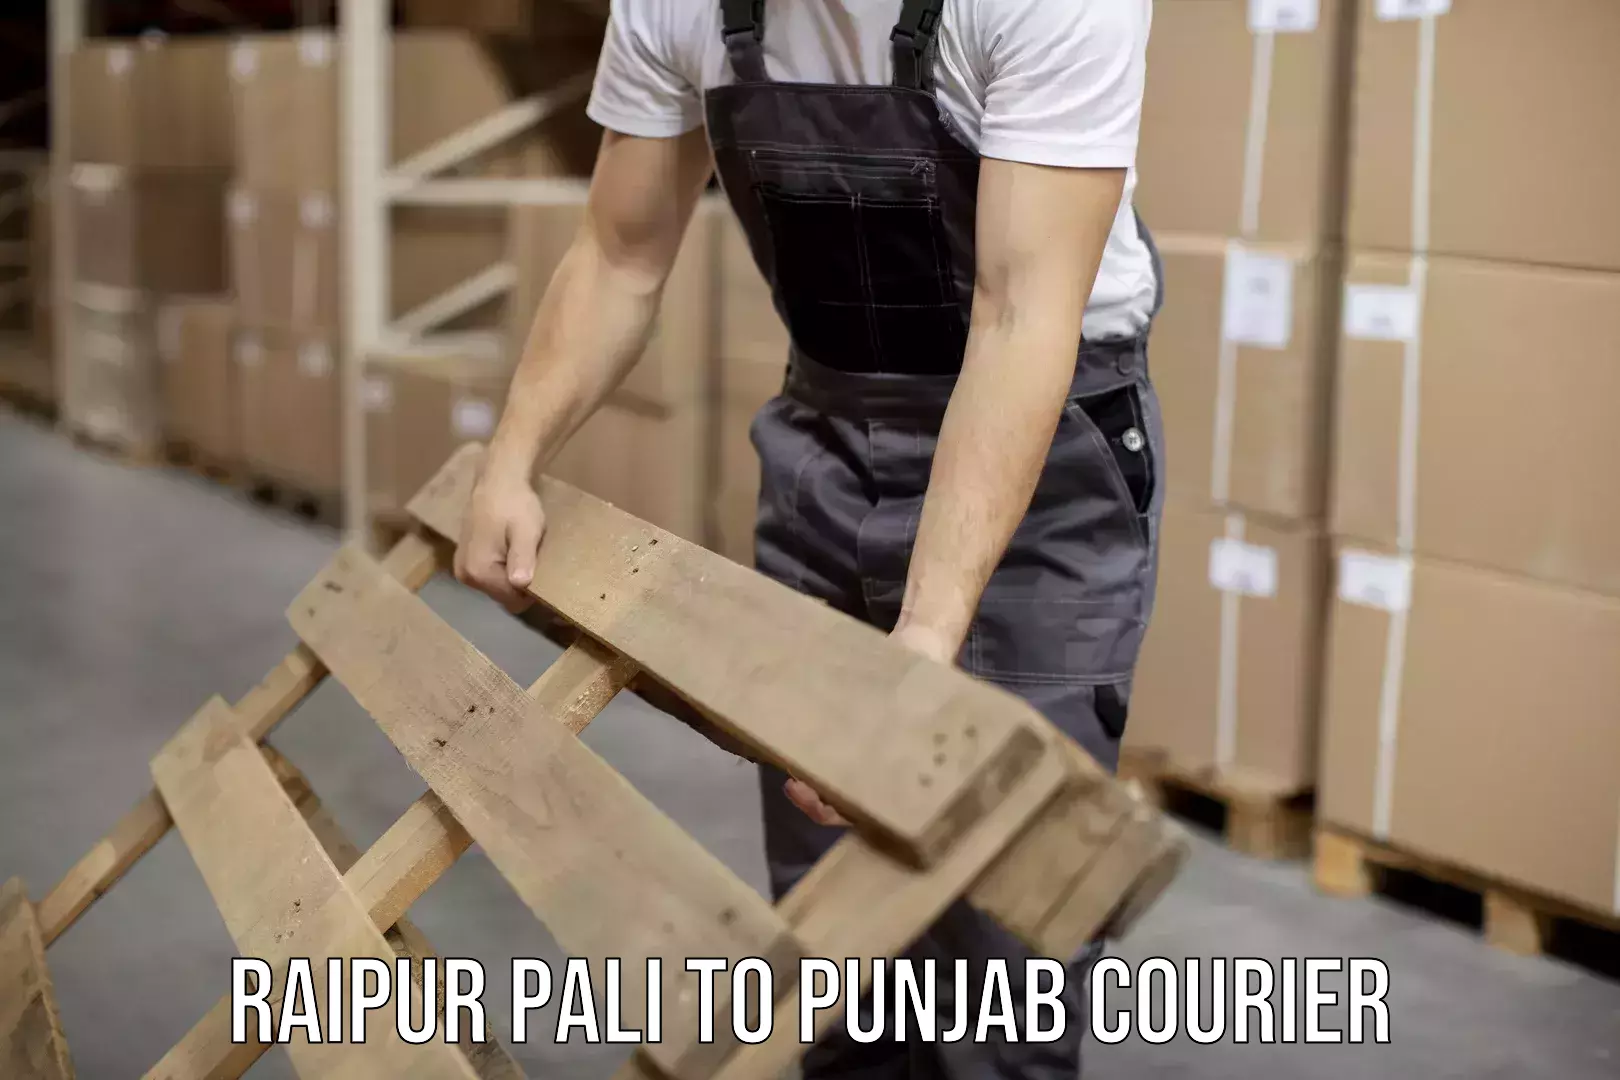 Global courier networks Raipur Pali to Patiala